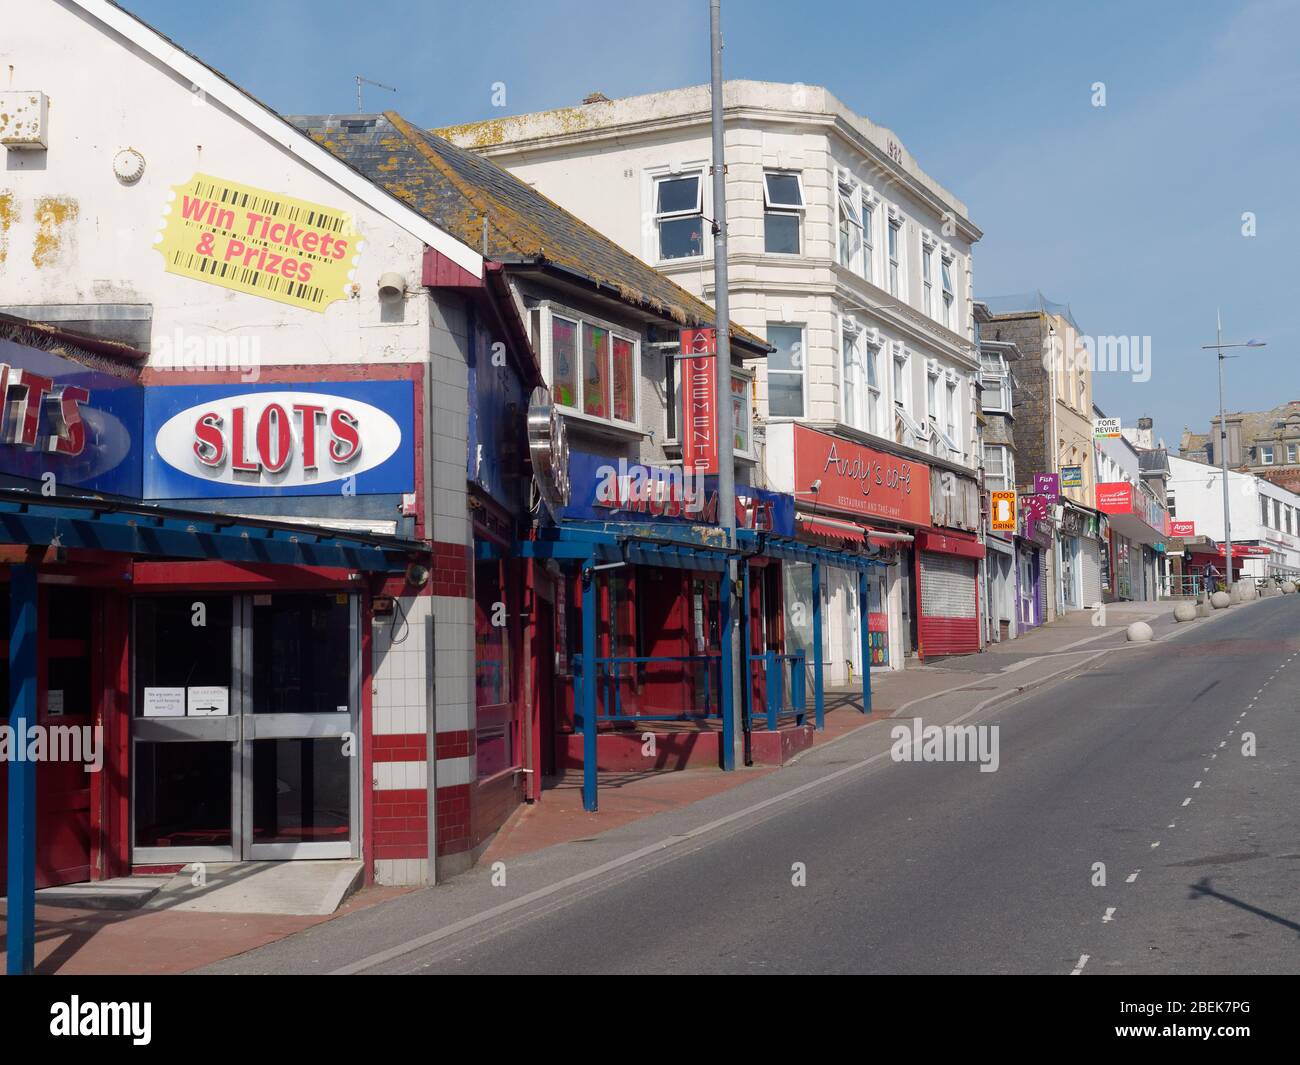 A town deserted during Covid pandemic Newquay Cornwall UK Stock Photo